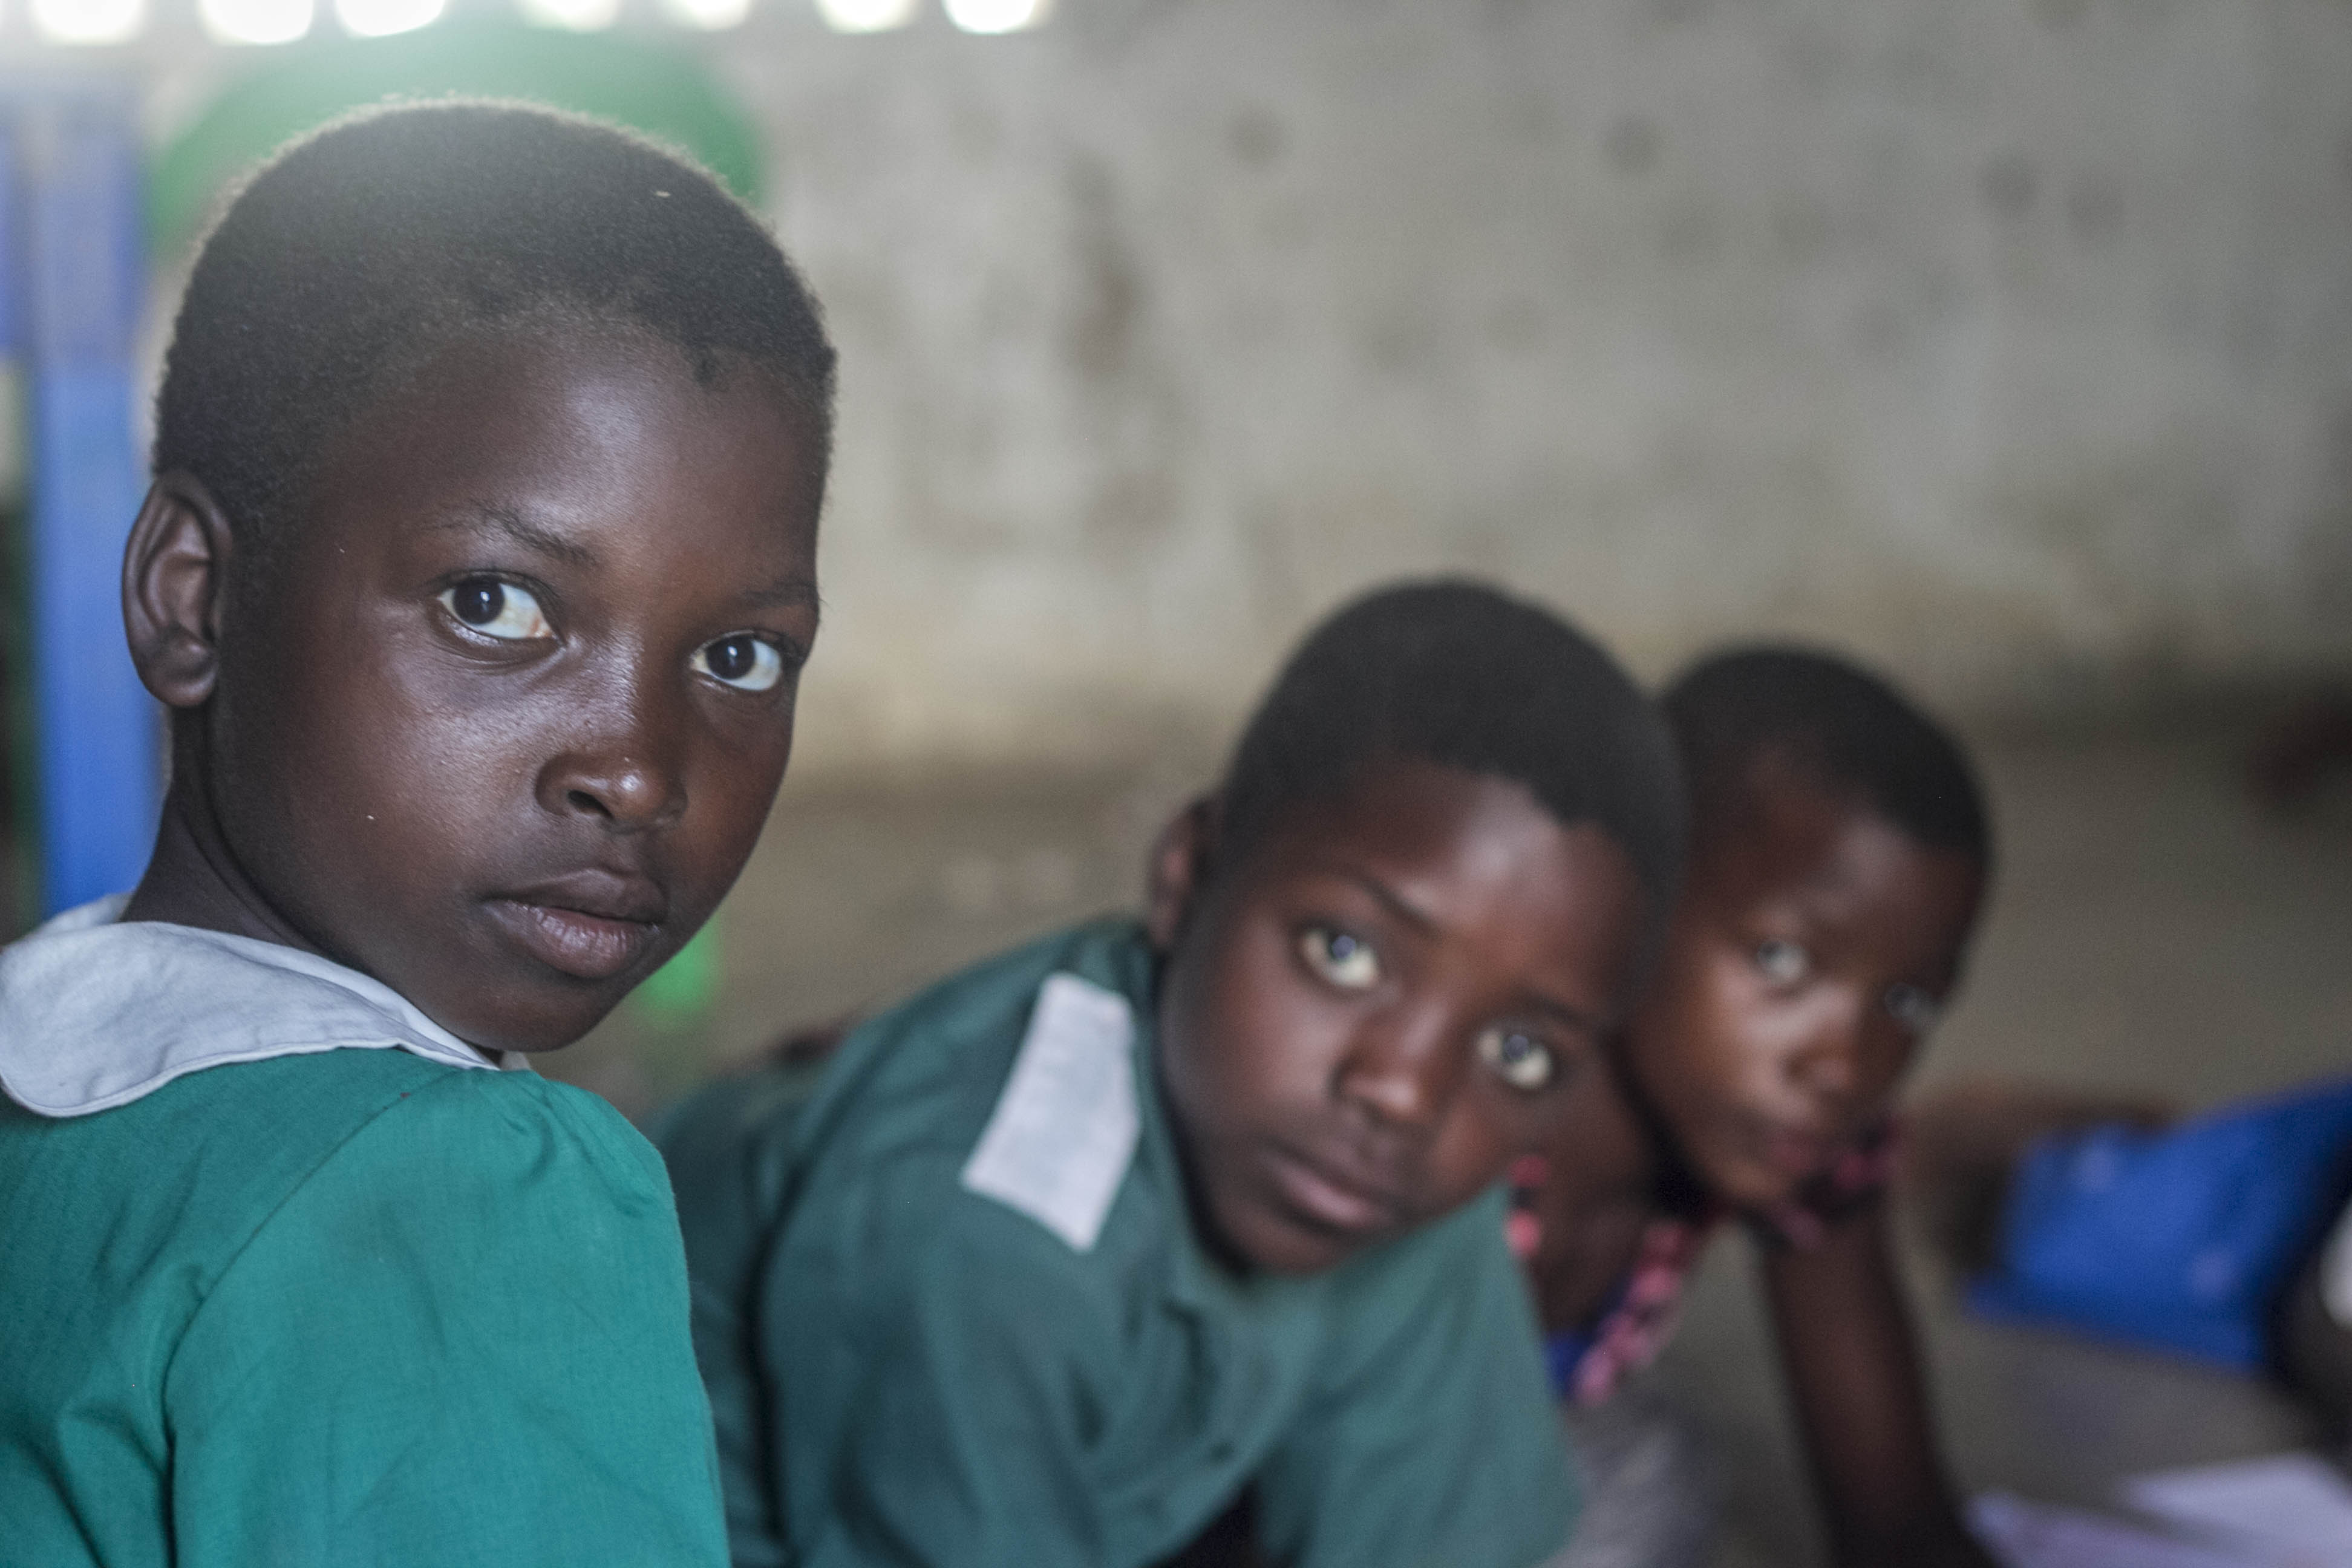 The attendance rate of female students decreases dramatically after Standard 4. Most often issues concerning menstruation, long distances to school, marriages, pregnancies & household duties stop girls from attending school. Only about 14% of rural girls manage the transition to secondary school.